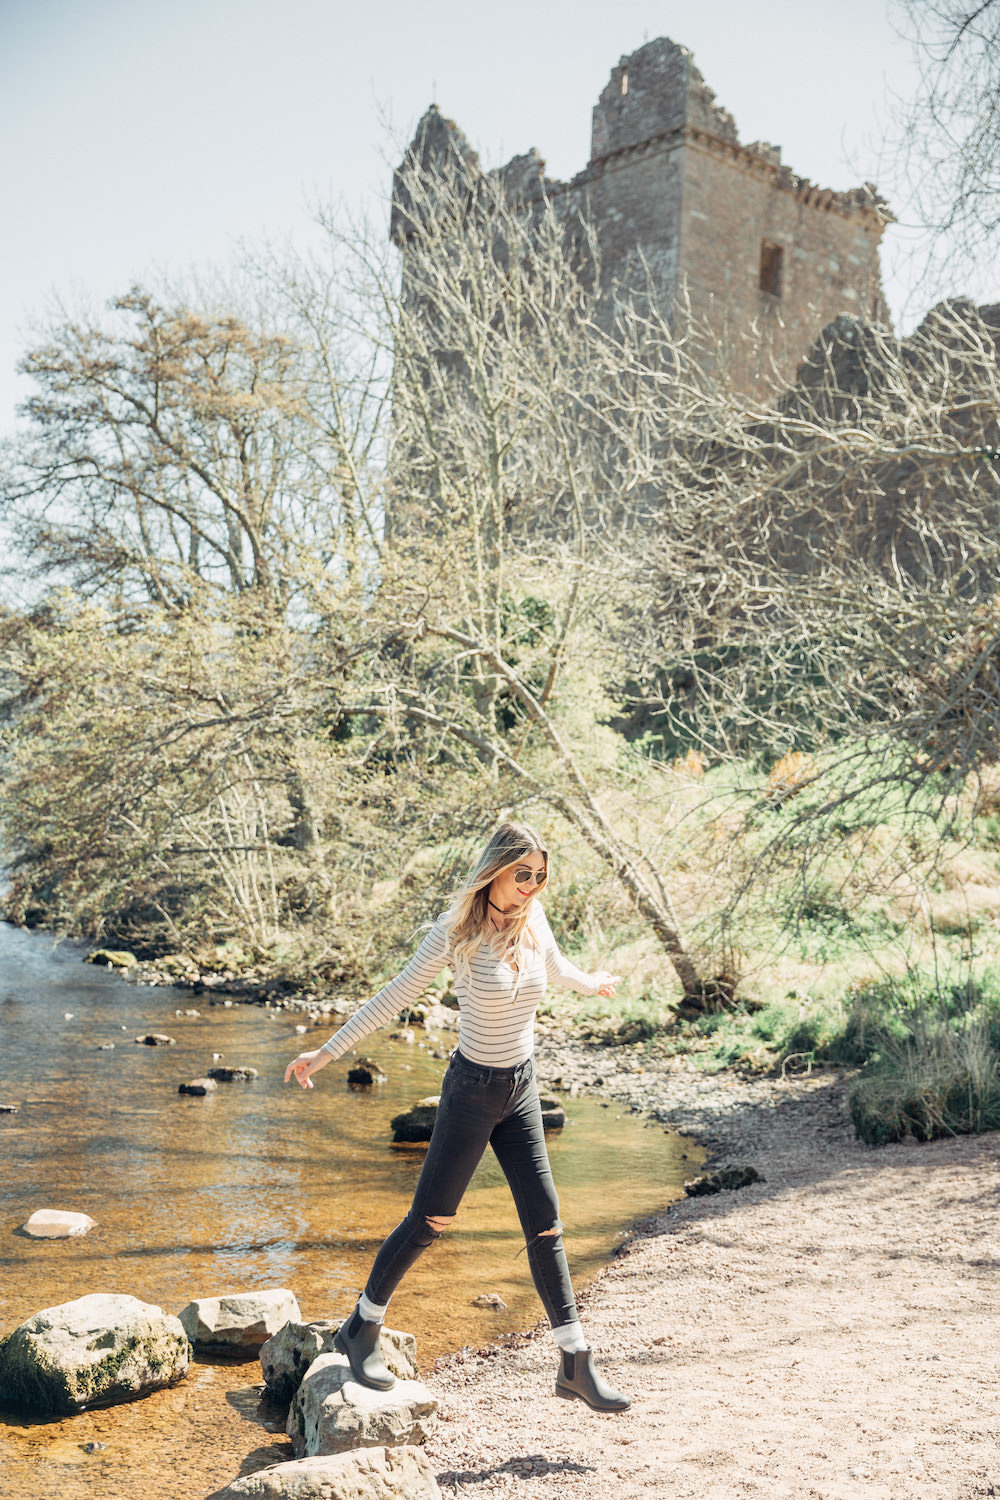 Caitlin Lindquist of the travel blog Dash of Darling shares her May cruise vacation with Princess Cruises to the British Isles, from England to Ireland to Scotland and France.